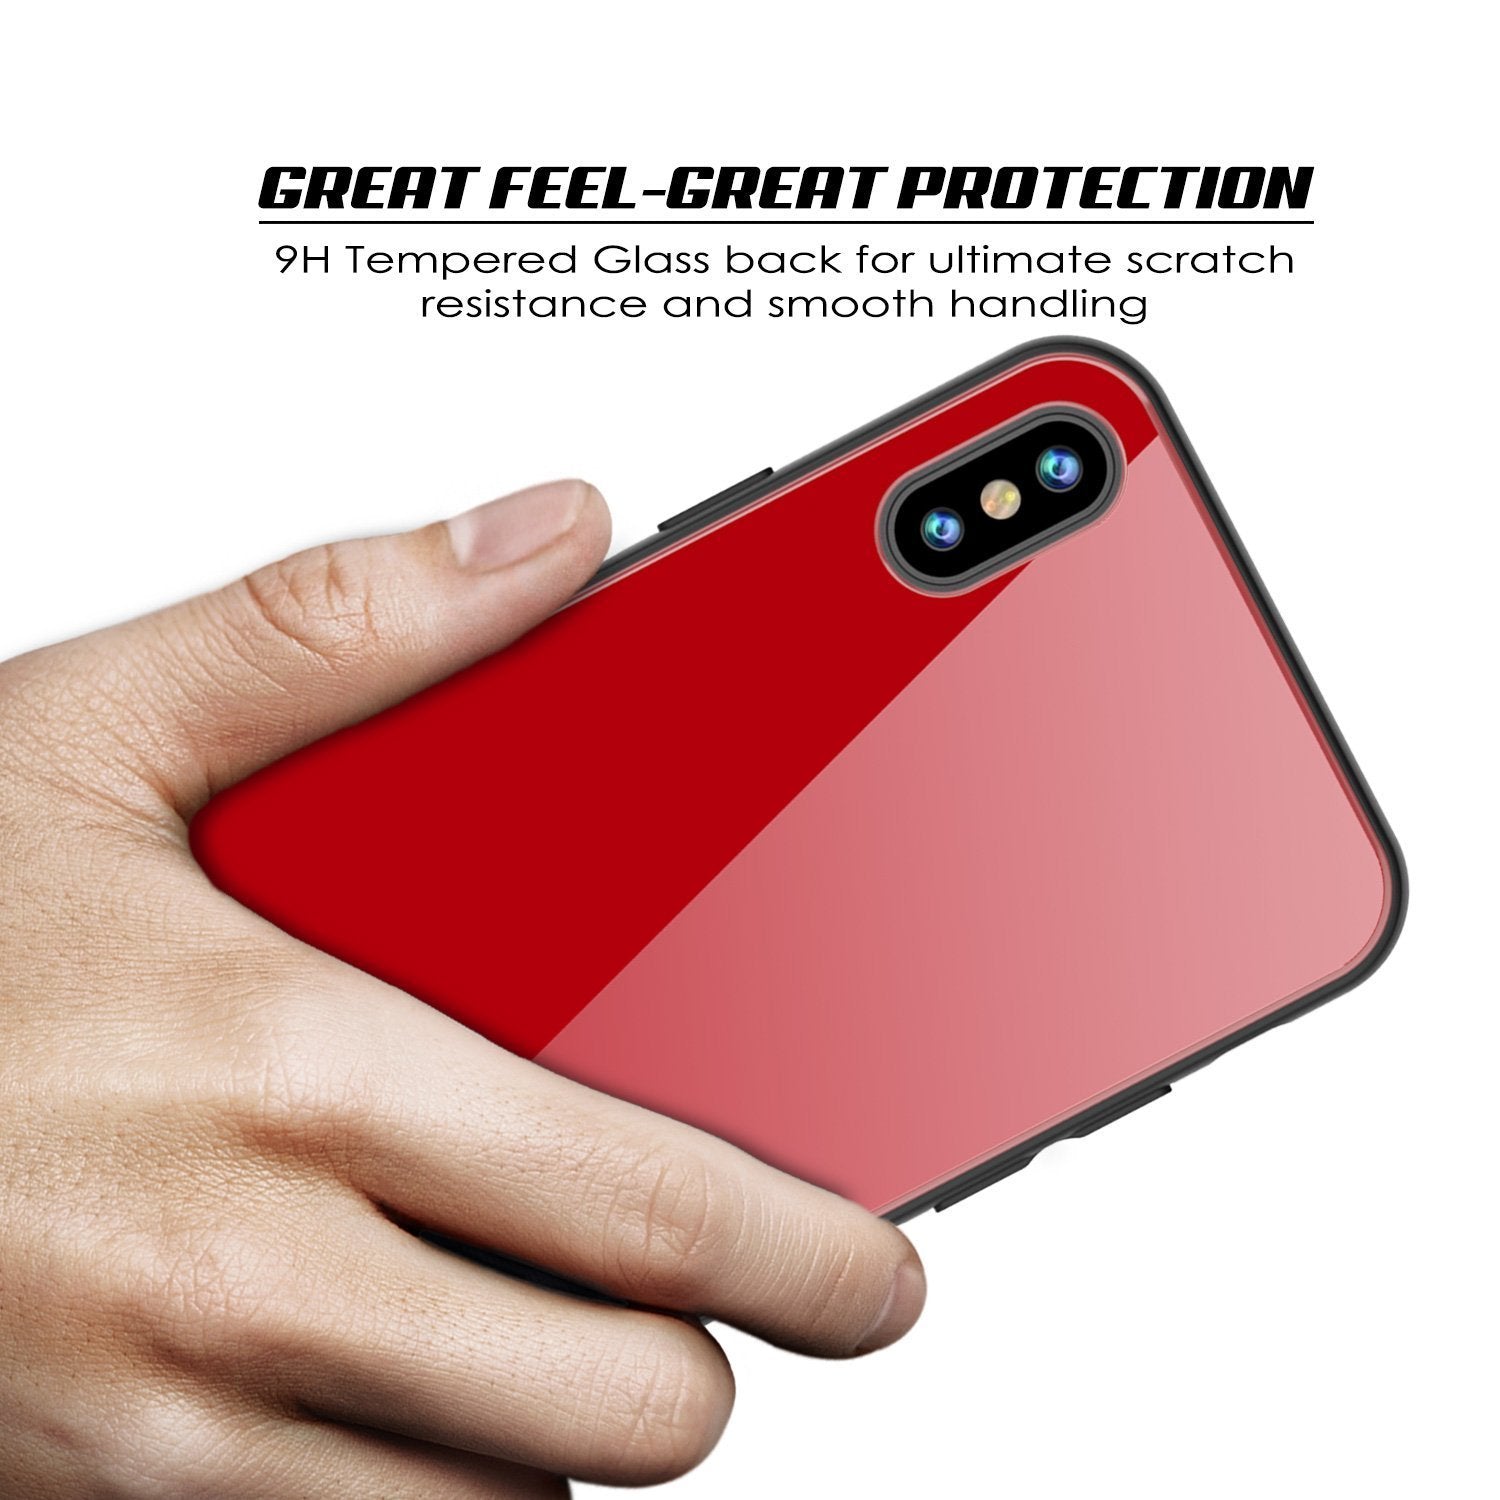 iPhone SE (4.7") Case, Punkcase GlassShield Ultra Thin Protective 9H Full Body Tempered Glass Cover W/ Drop Protection & Non Slip Grip for Apple iPhone 7 / Apple iPhone SE (4.7") (Red)